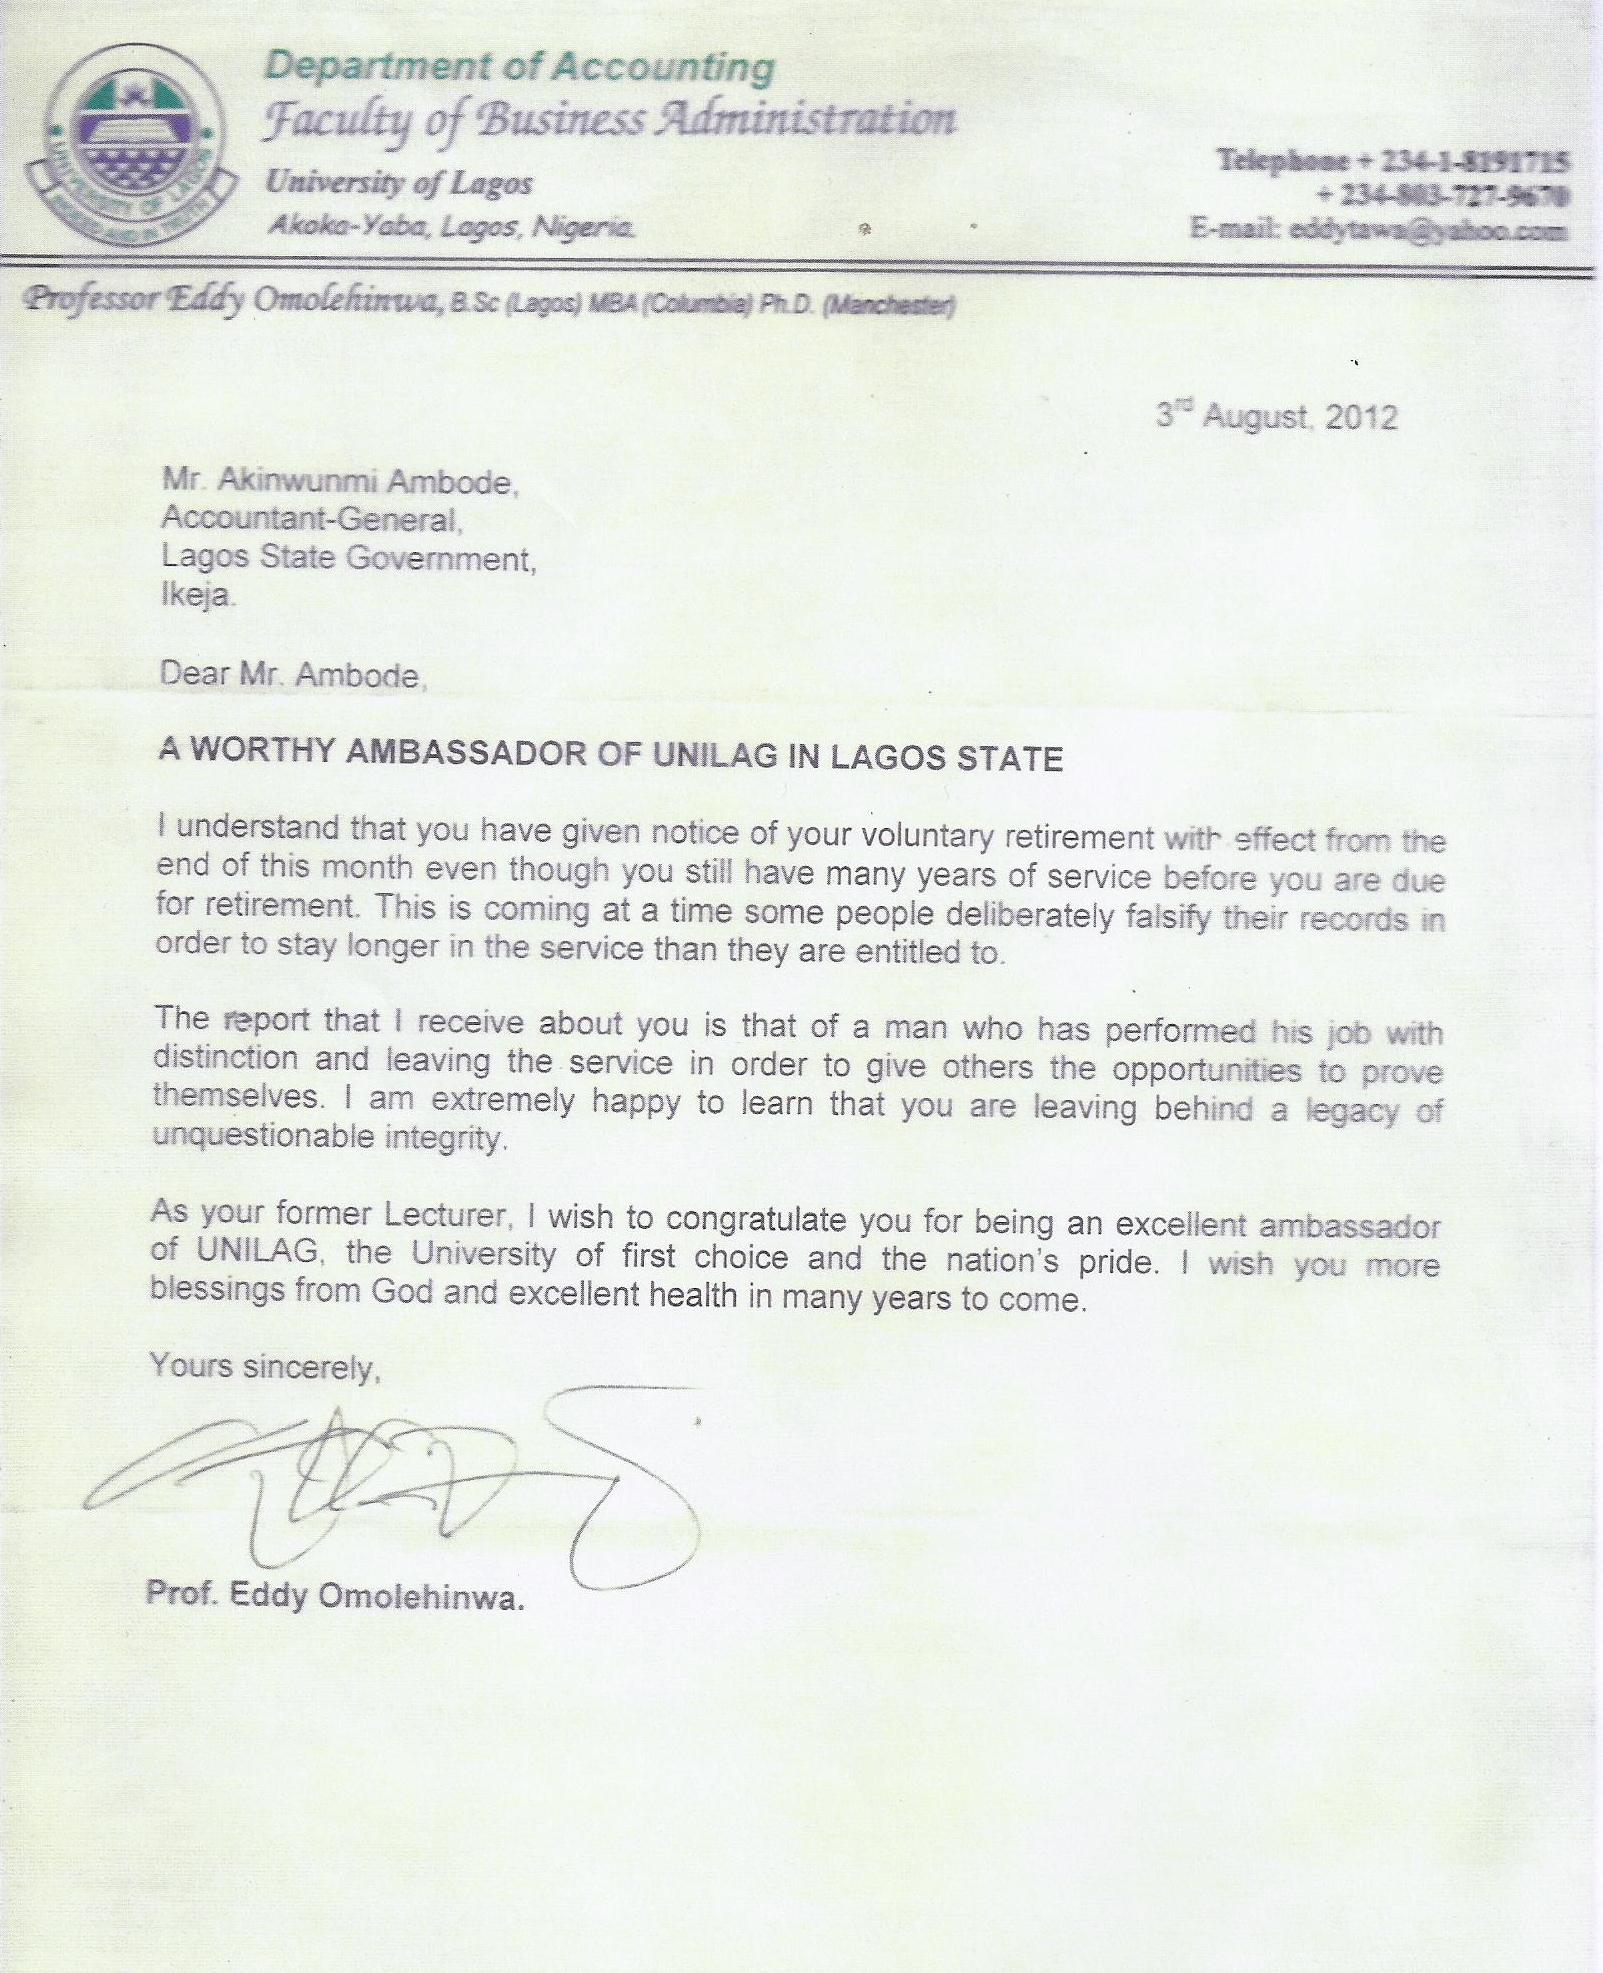 Akinwunmi Ambode's Letter of Commendation